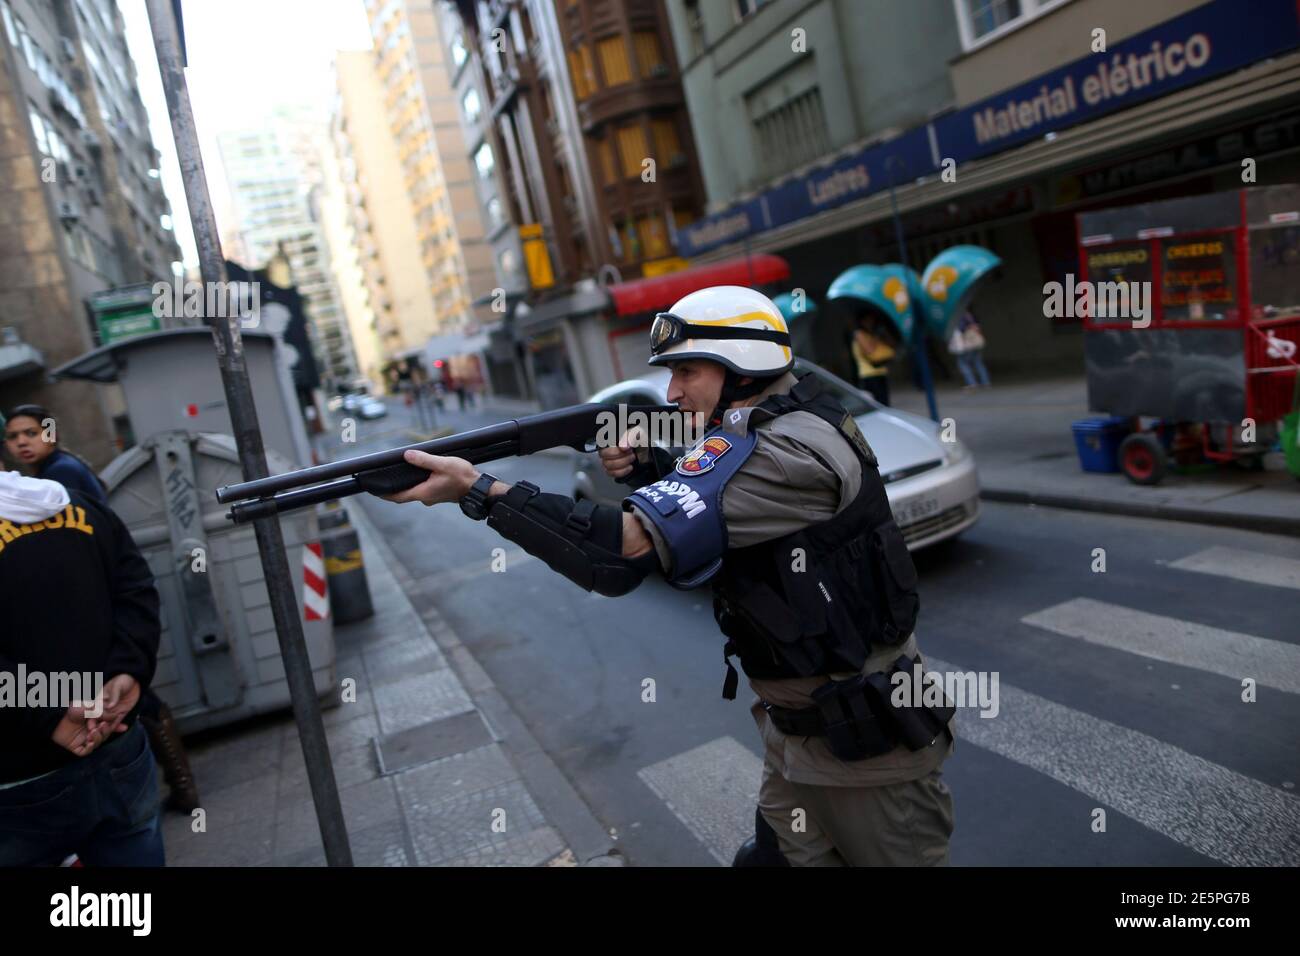 A policeman points his rifle after clashes between demonstrators and police during a protest against the 2014 World Cup in Porto Alegre, June 12 , 2014.   REUTERS/Edgard Garrido (BRAZIL  - Tags: SPORT SOCCER WORLD CUP CIVIL UNREST) Stock Photo